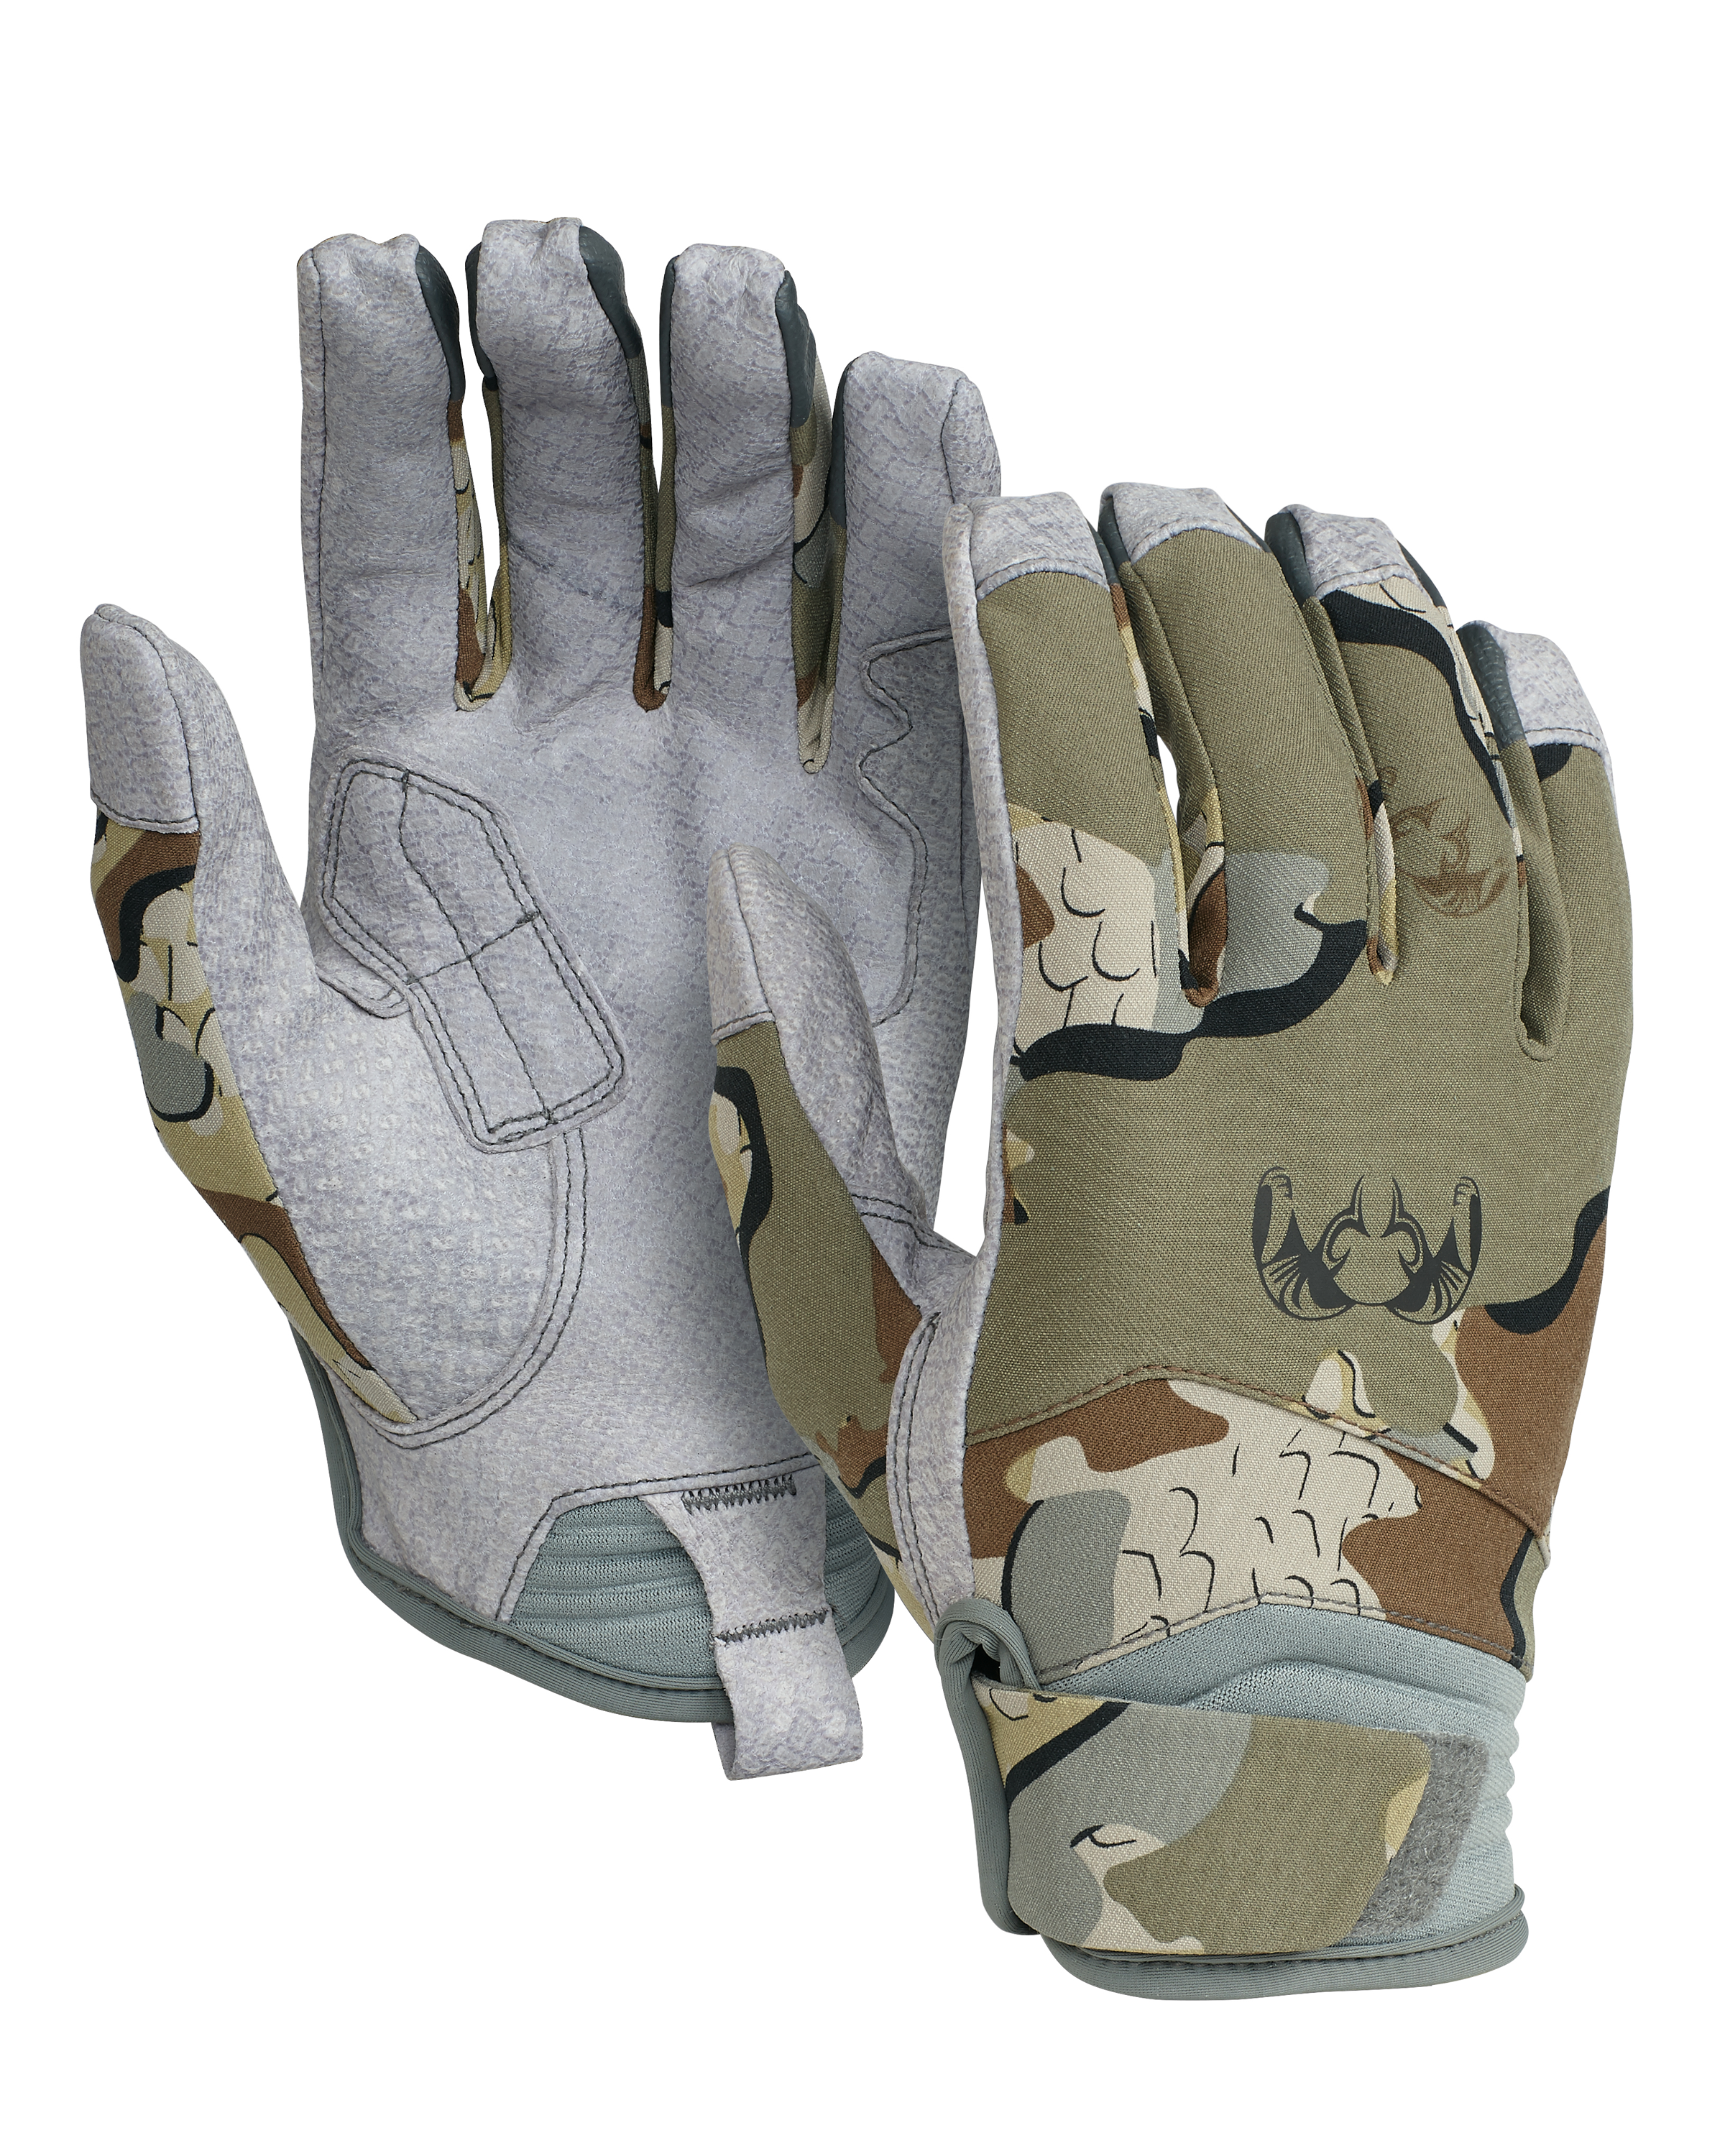 KUIU Attack Hunting Glove in Valo | Large